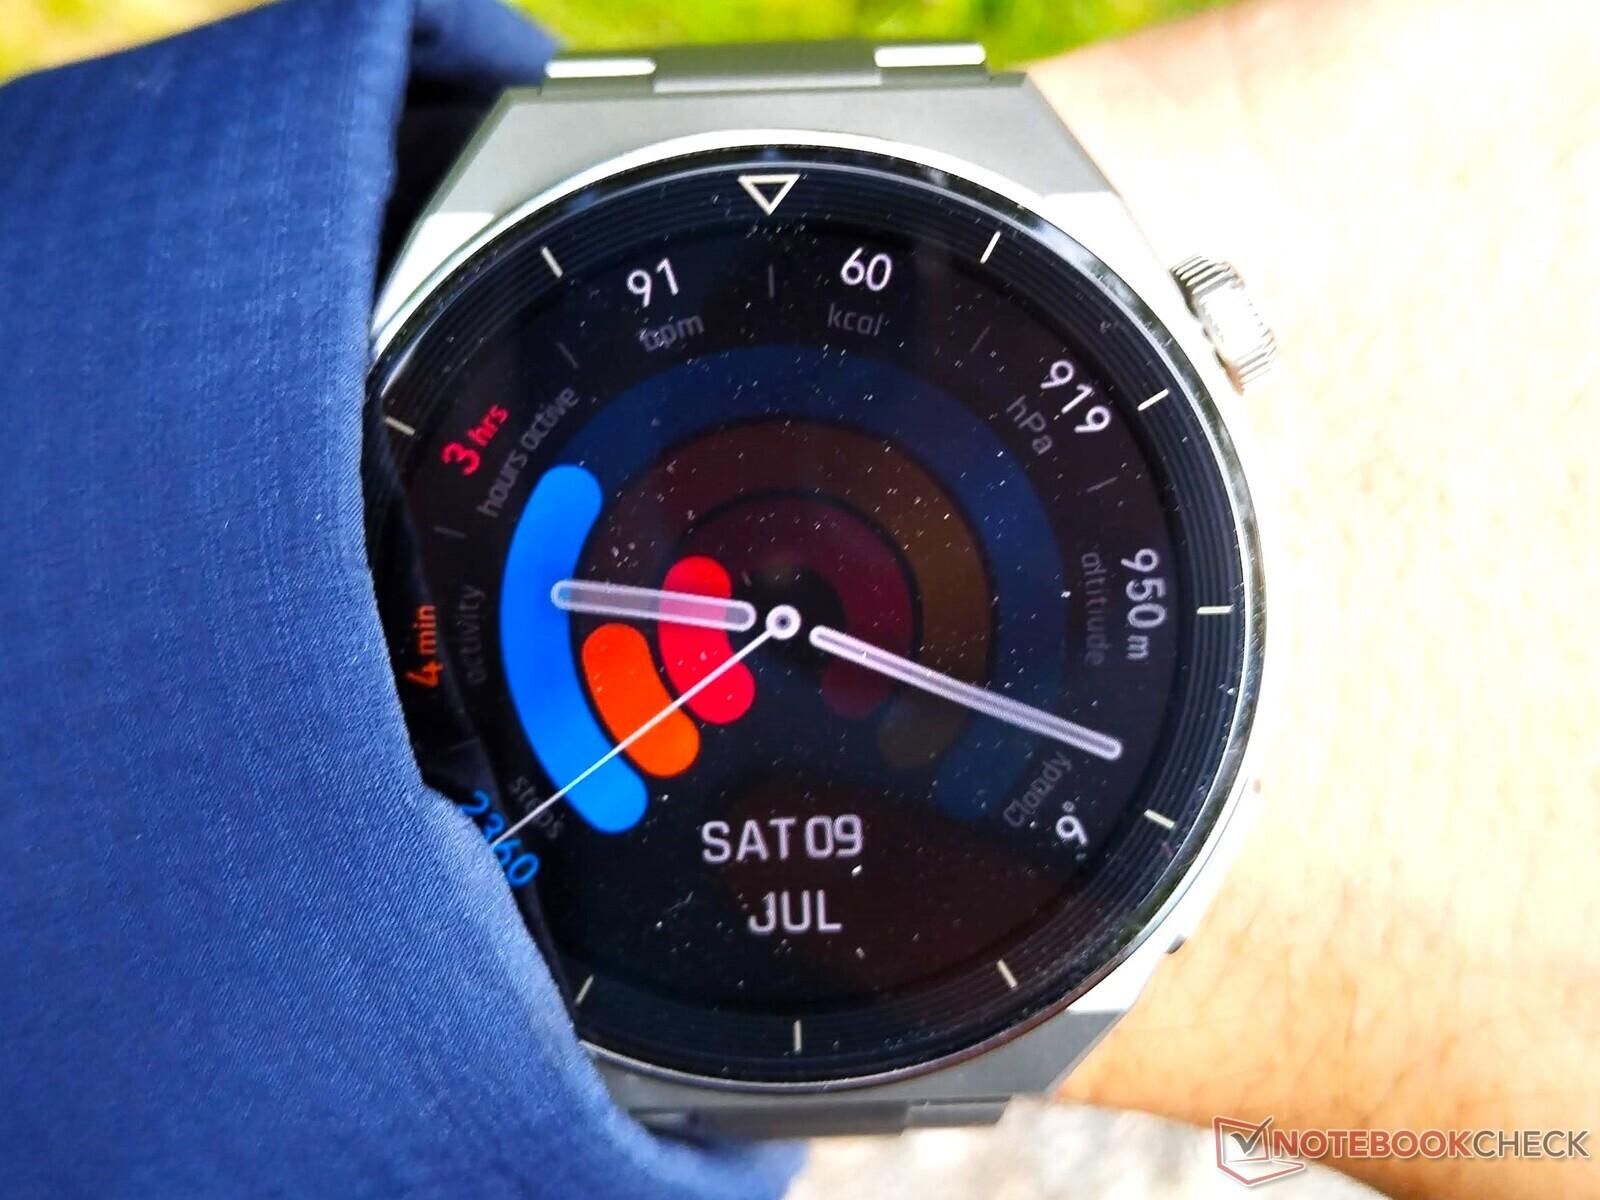 Latest Watch GT 3 Pro update fixes SpO2 bug for